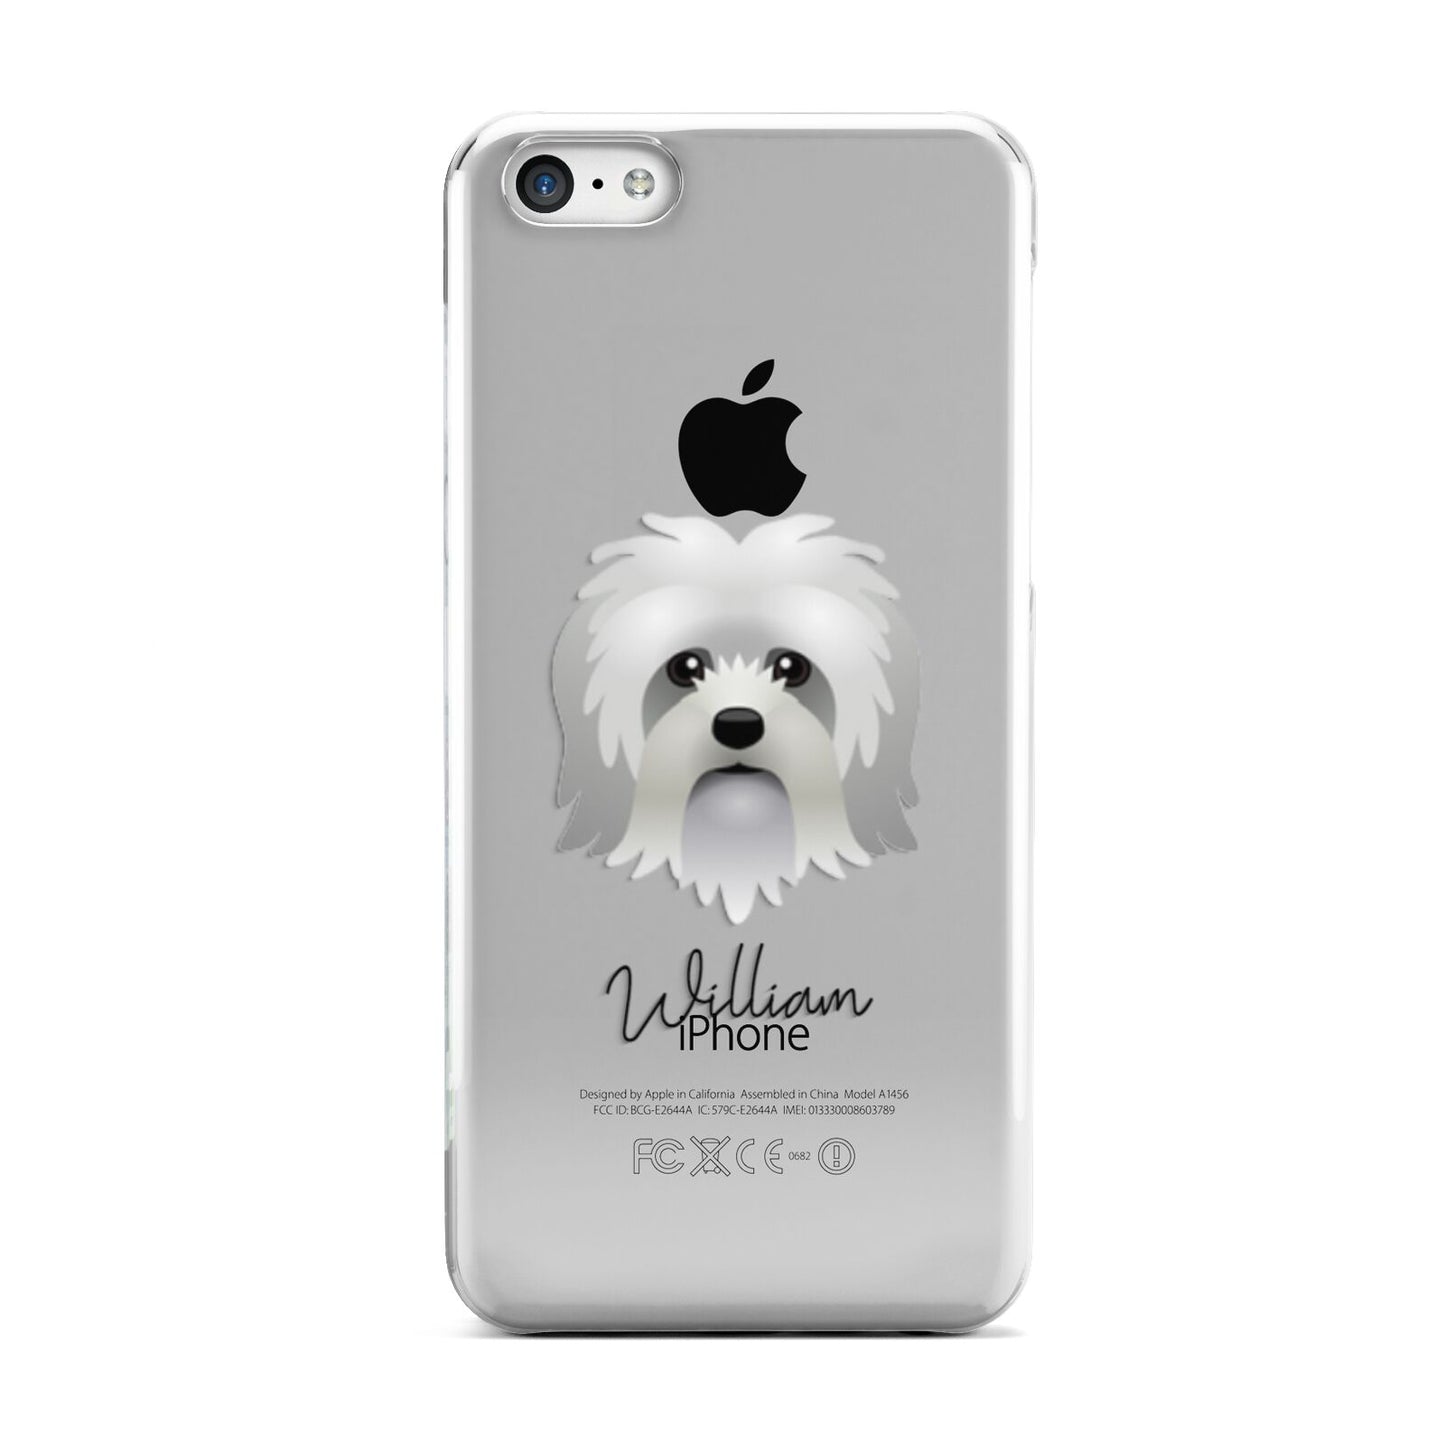 Lo wchen Personalised Apple iPhone 5c Case